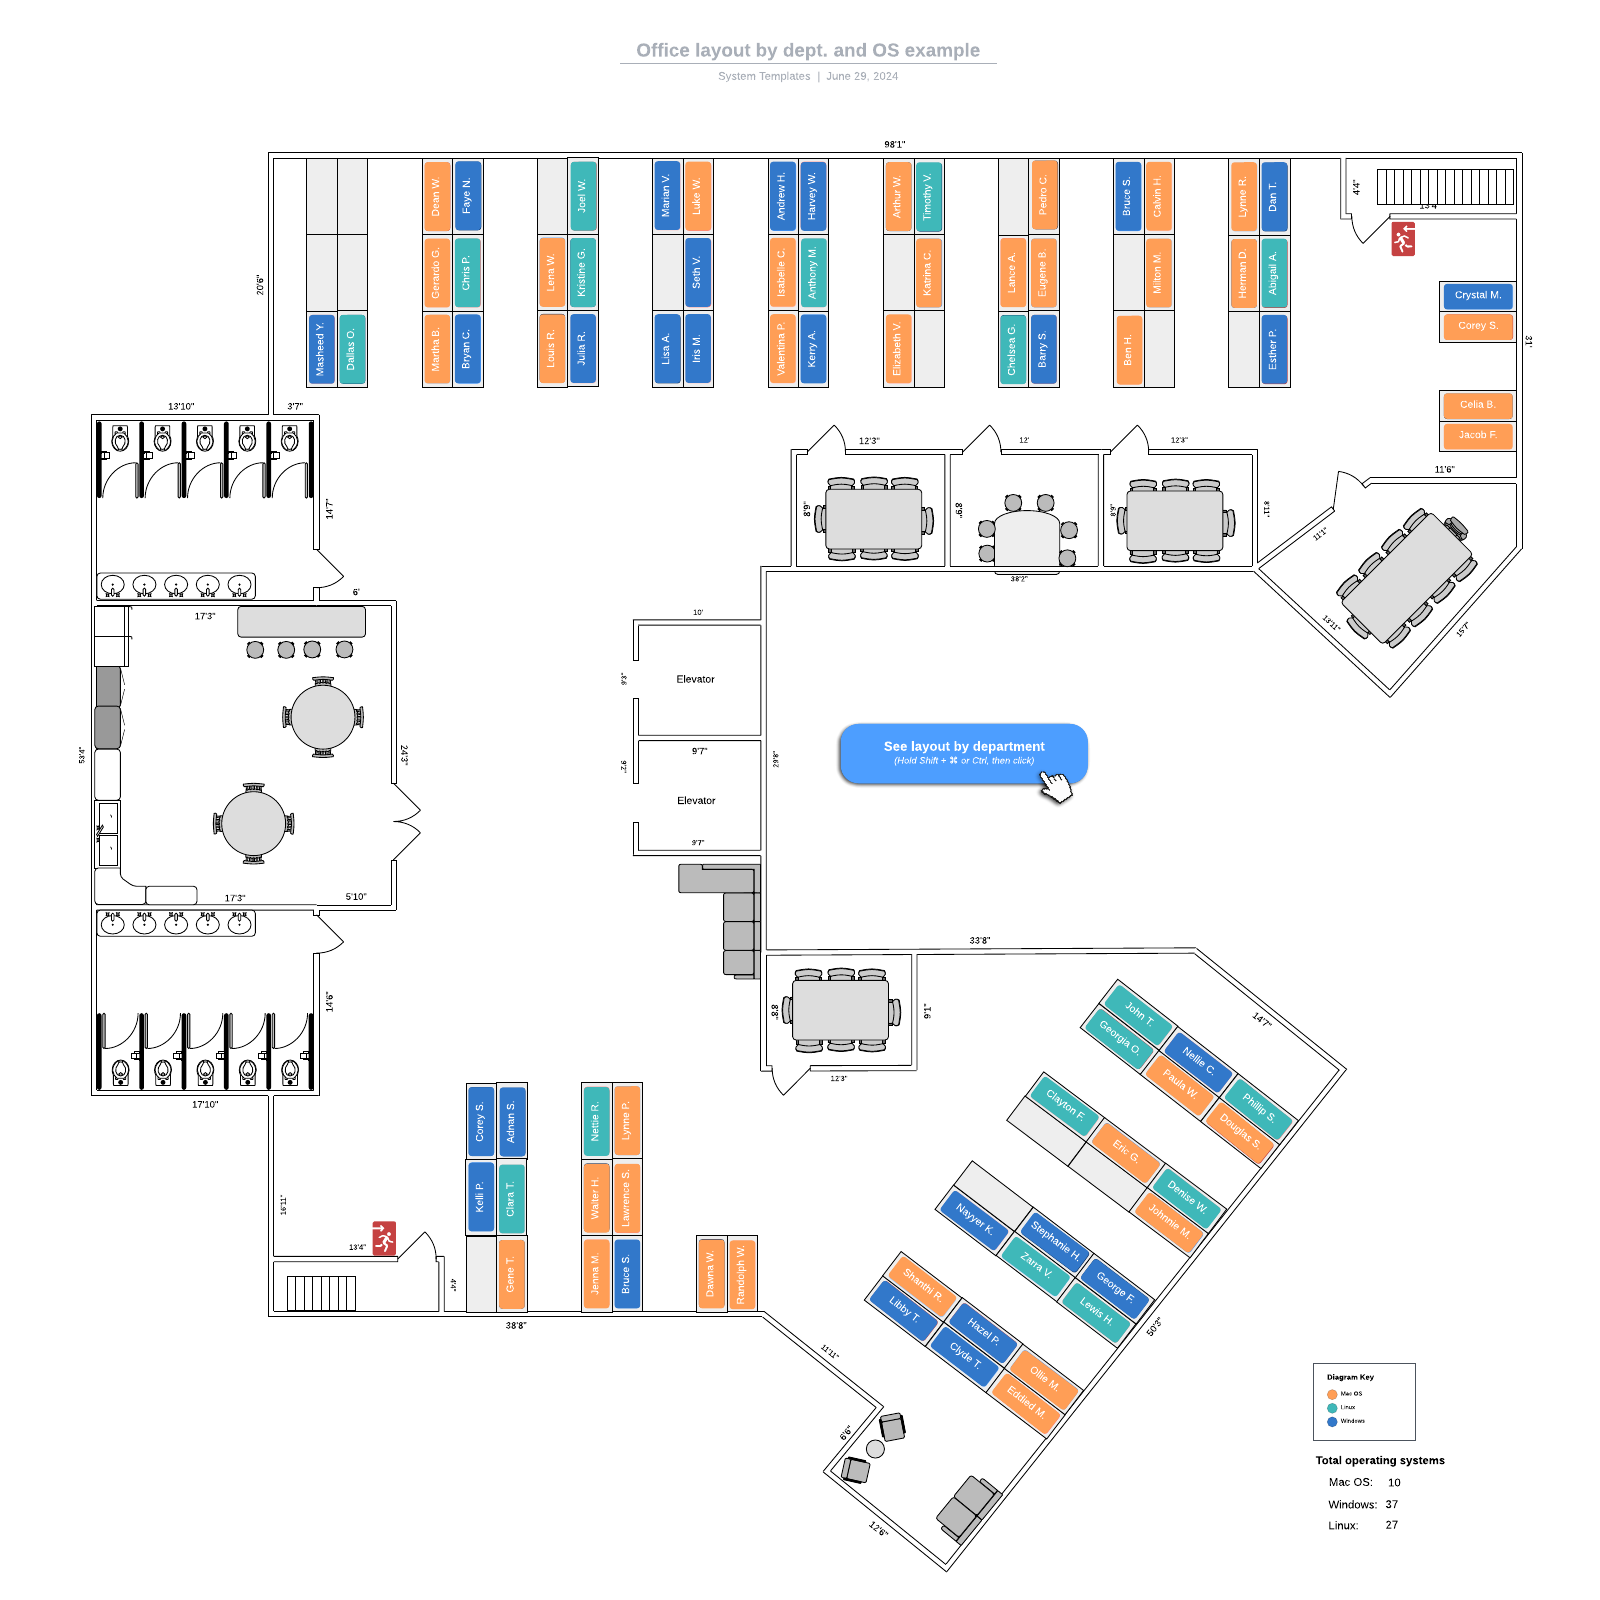 Office layout by dept. and OS example example